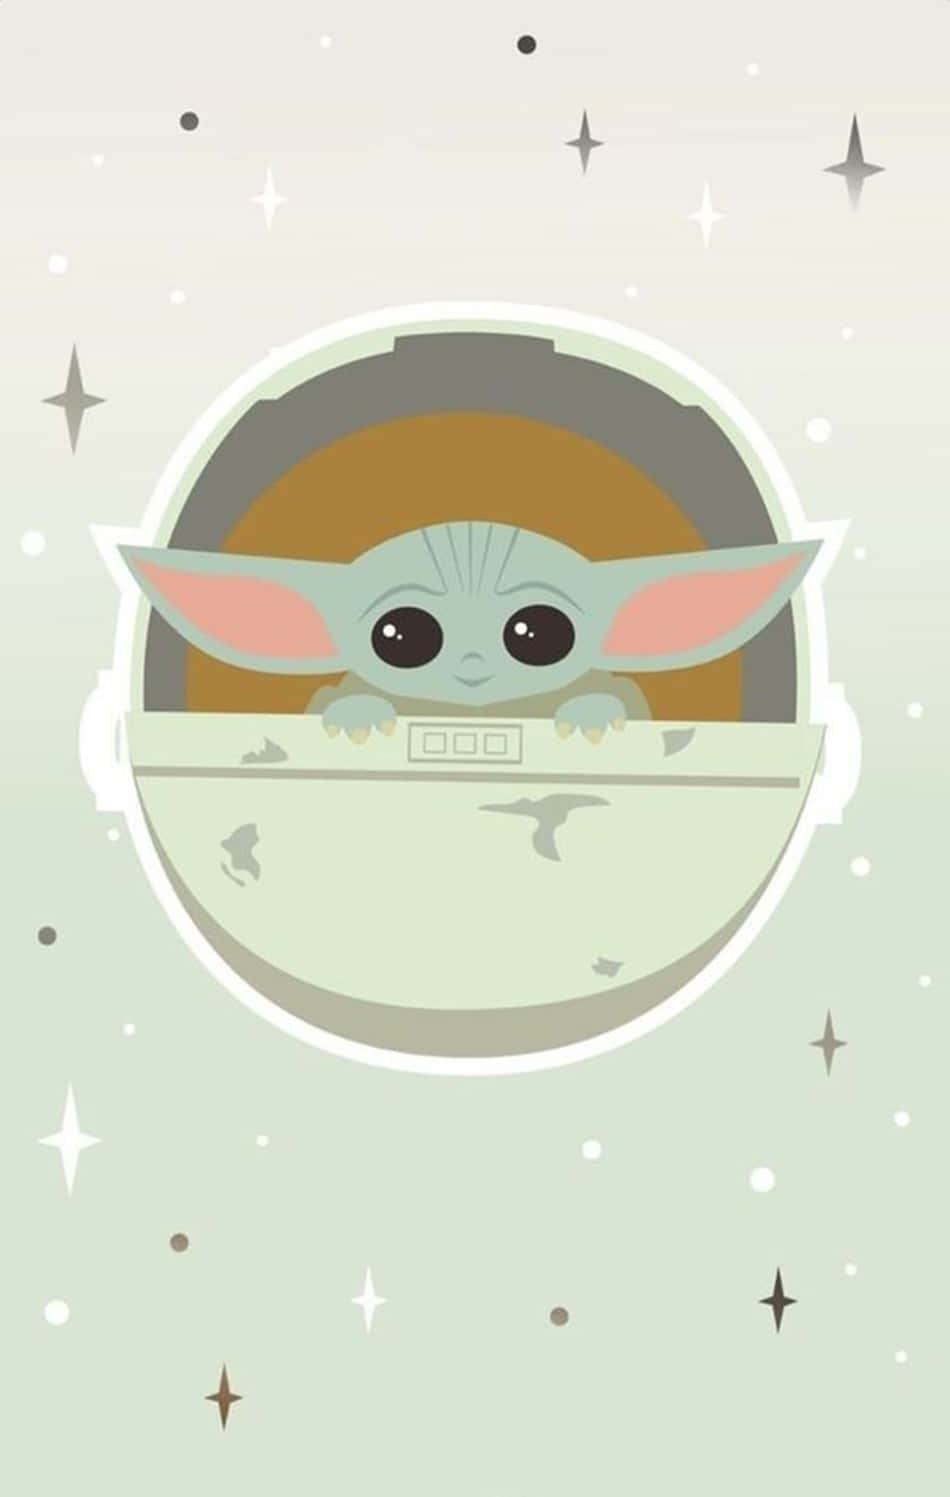 Baby Yoda iPhone Wallpaper with high-resolution 1080x1920 pixel. You can use this wallpaper for your iPhone 5, 6, 7, 8, X, XS, XR backgrounds, Mobile Screensaver, or iPad Lock Screen - Baby Yoda